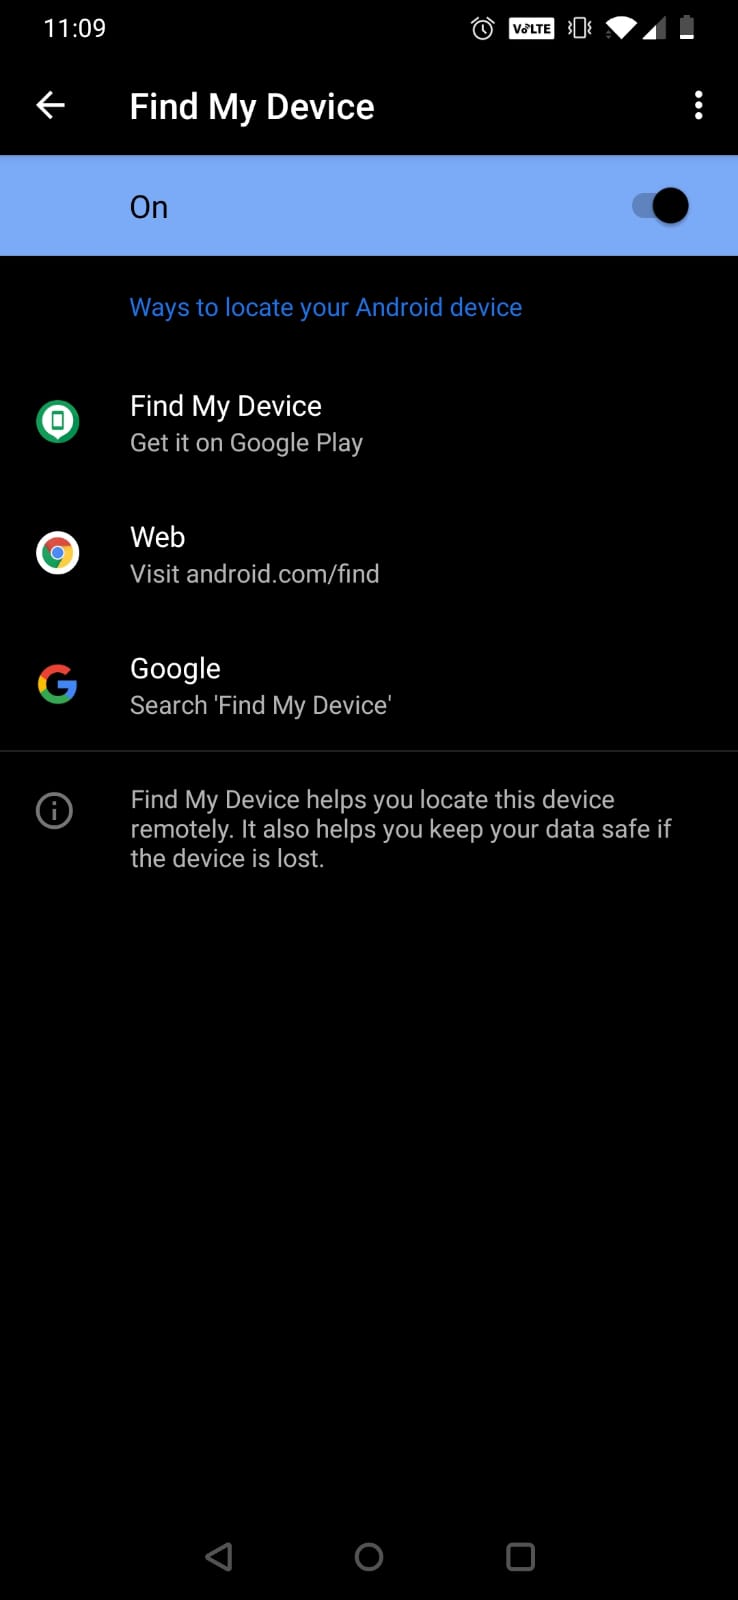 Find My Device setting on Android device